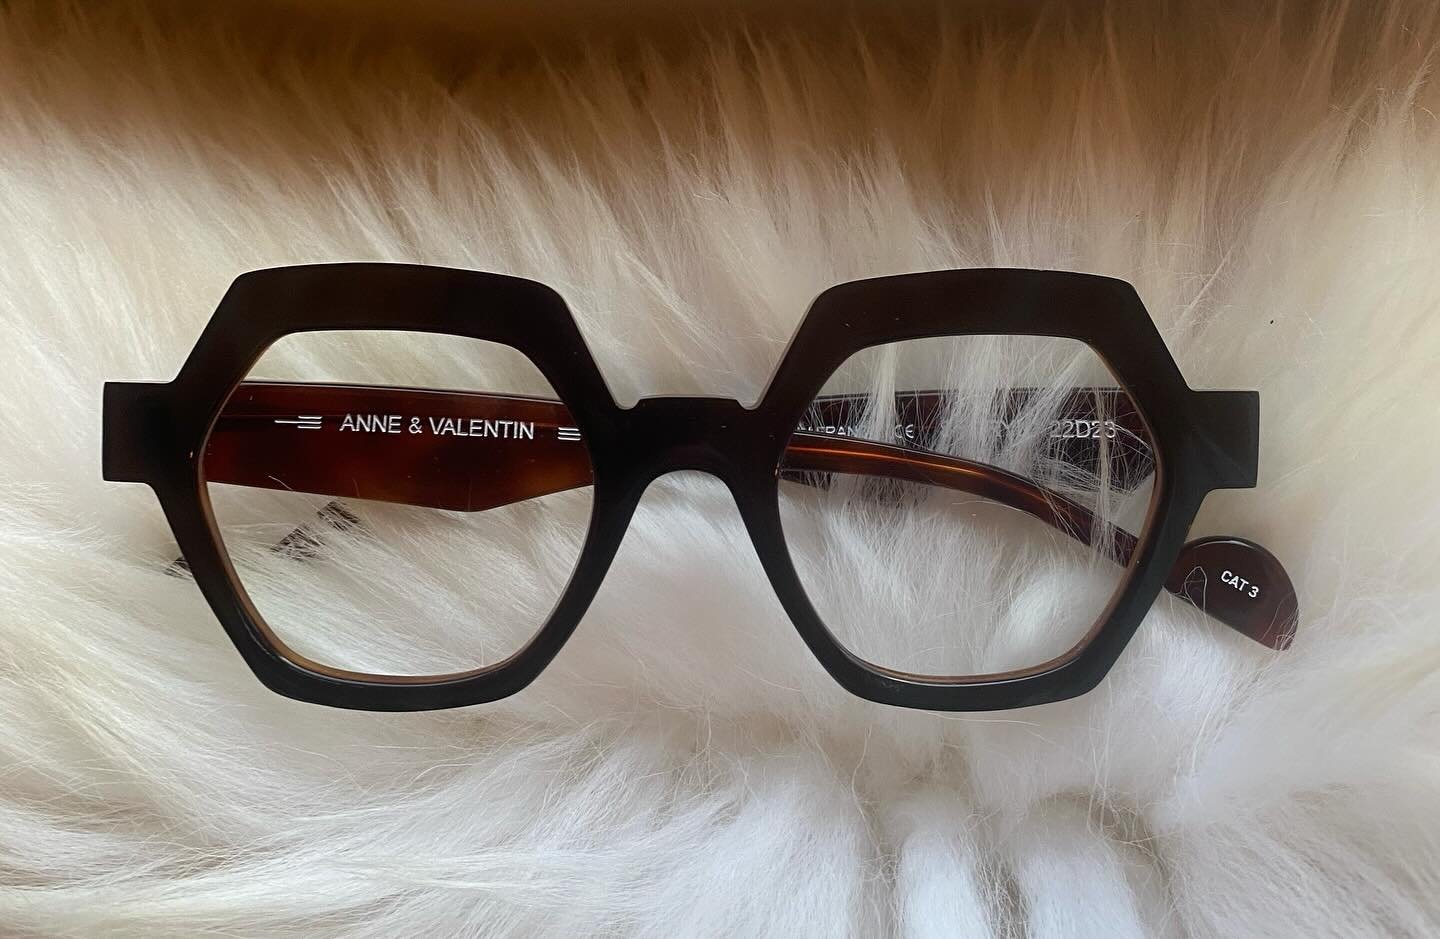 This stunning frame was delivered to its new home today. They look absolutely amazing on . Fill my heart with joy. 
.
.
.
.
.
.
.
.
.
.
.
.
.
#happiness #beautiful #spectacle #gorgeousglasses #fabulouseyewear #bespectacled #anneetvalentin #anneetvale